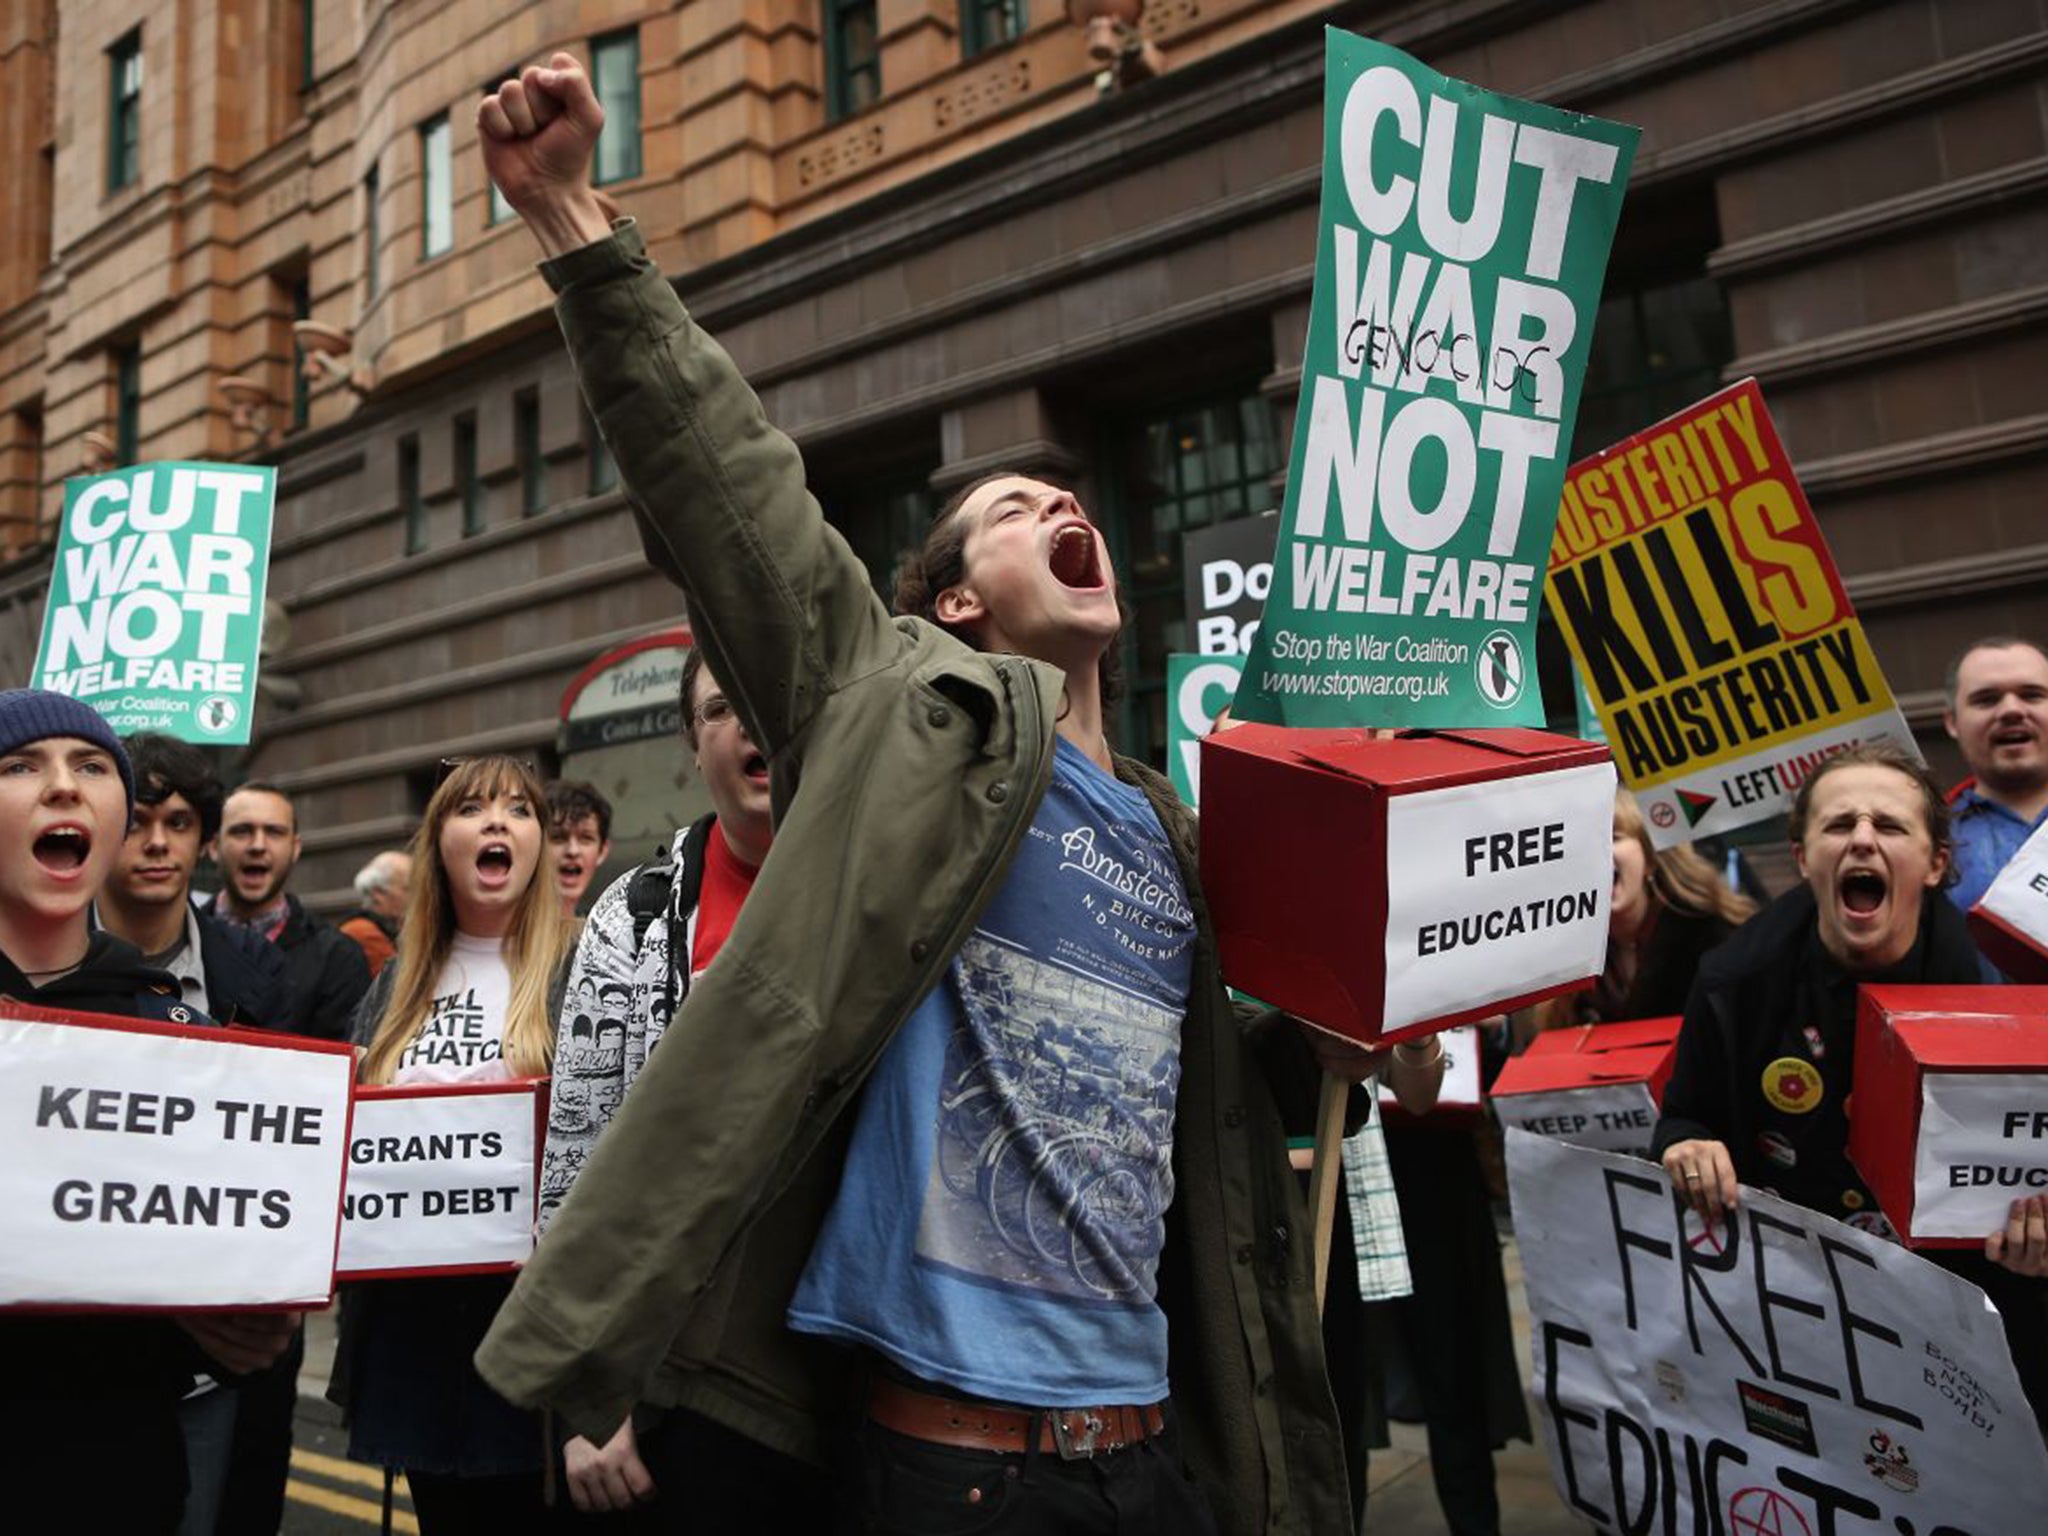 Anti-austerity campaigners continued their protests outside the conference after the singer Charlotte Church said she is “really sorry” for the behaviour of some among their number after journalists entering the building were spat upon. Jeremy Corbyn, the Labour leader, also urged ‘civilised debate’ in Manchester last night at a protest organised by the Communication Workers’ Union